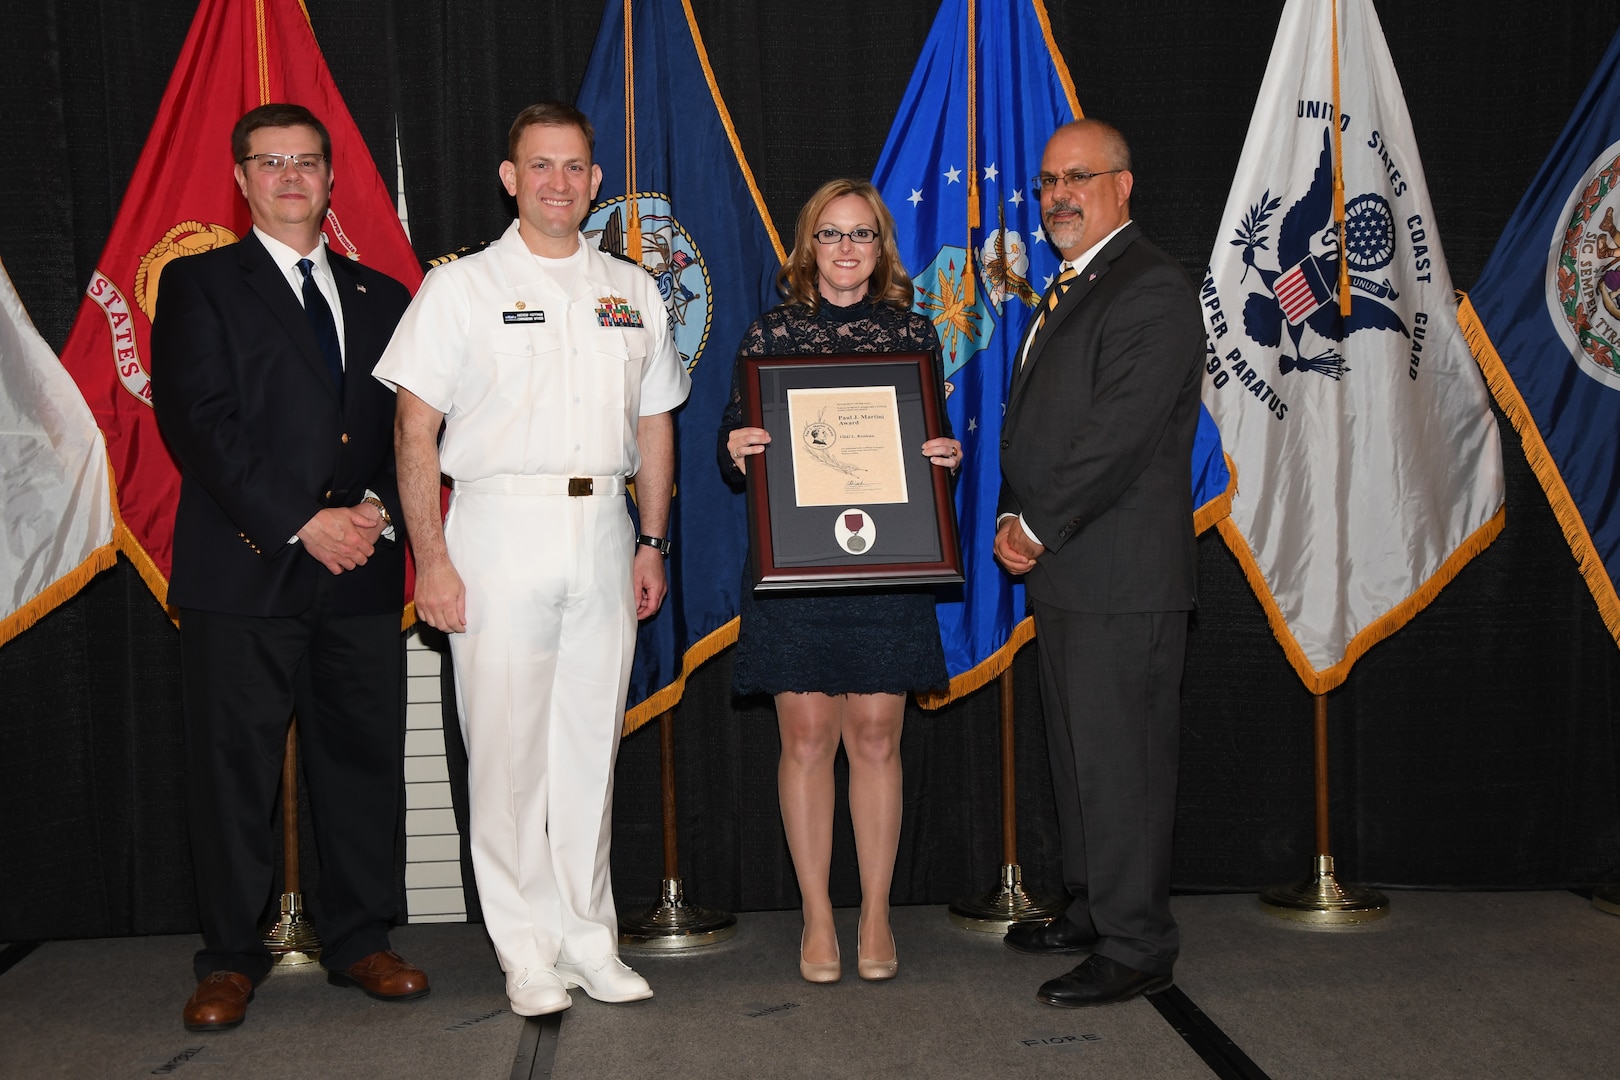 IMAGE: Vikki Rouleau is presented the Paul J. Martini Award at Naval Surface Warfare Center Dahlgren Division's annual awards ceremony, Apr. 26 at the Fredericksburg Expo and Conference Center.

The award is named in honor of Paul J. Martini, who was head of the Engineering Support Directorate of the Naval Ordnance Laboratory from November 1951 to December 1973.